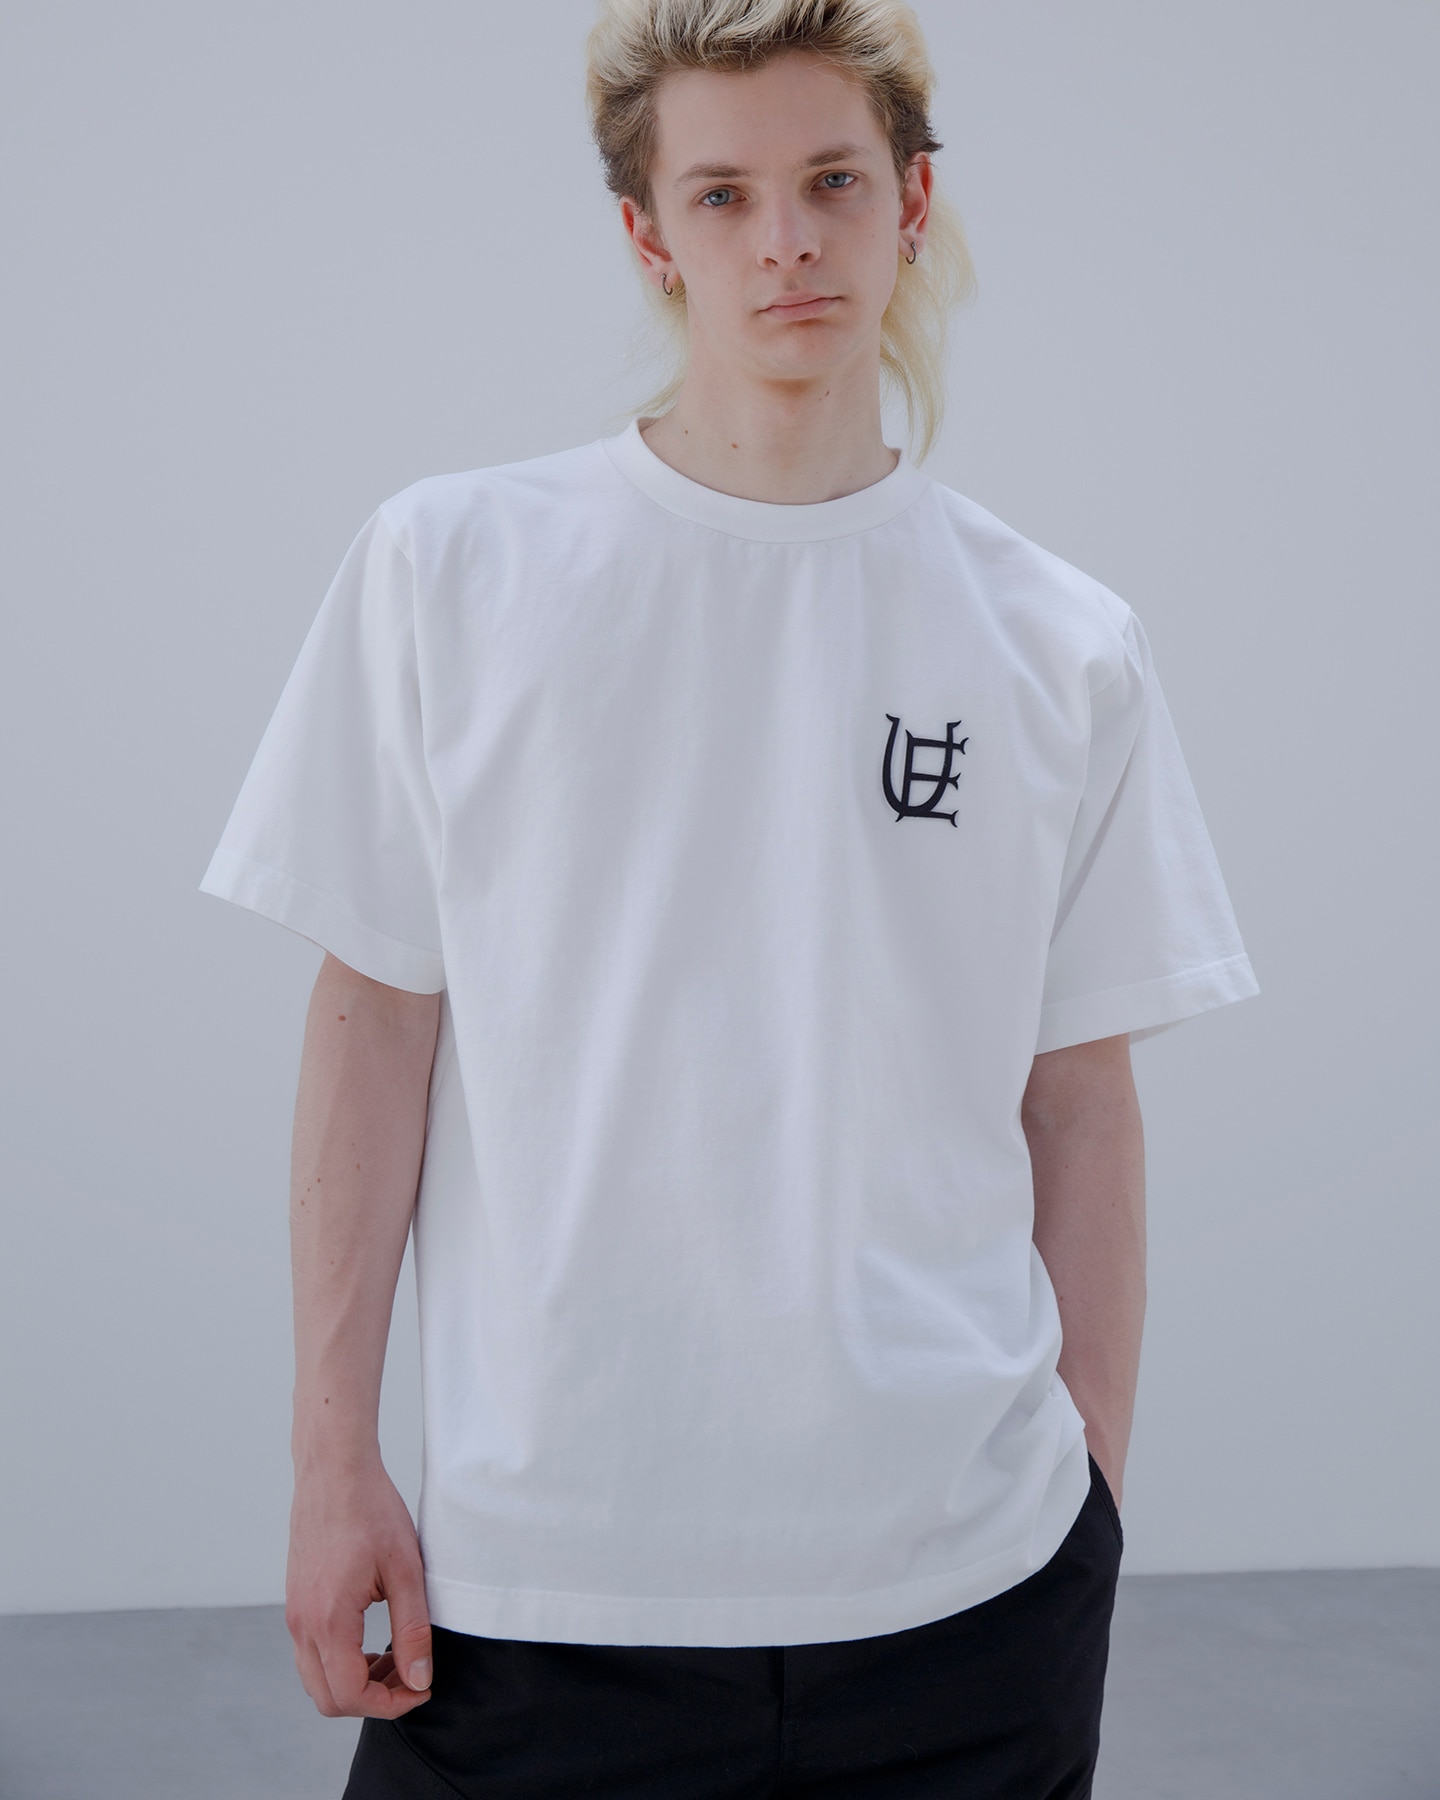 SOPH. | AUTHENTIC LOGO S/S WIDE TEE(2 WHITE):